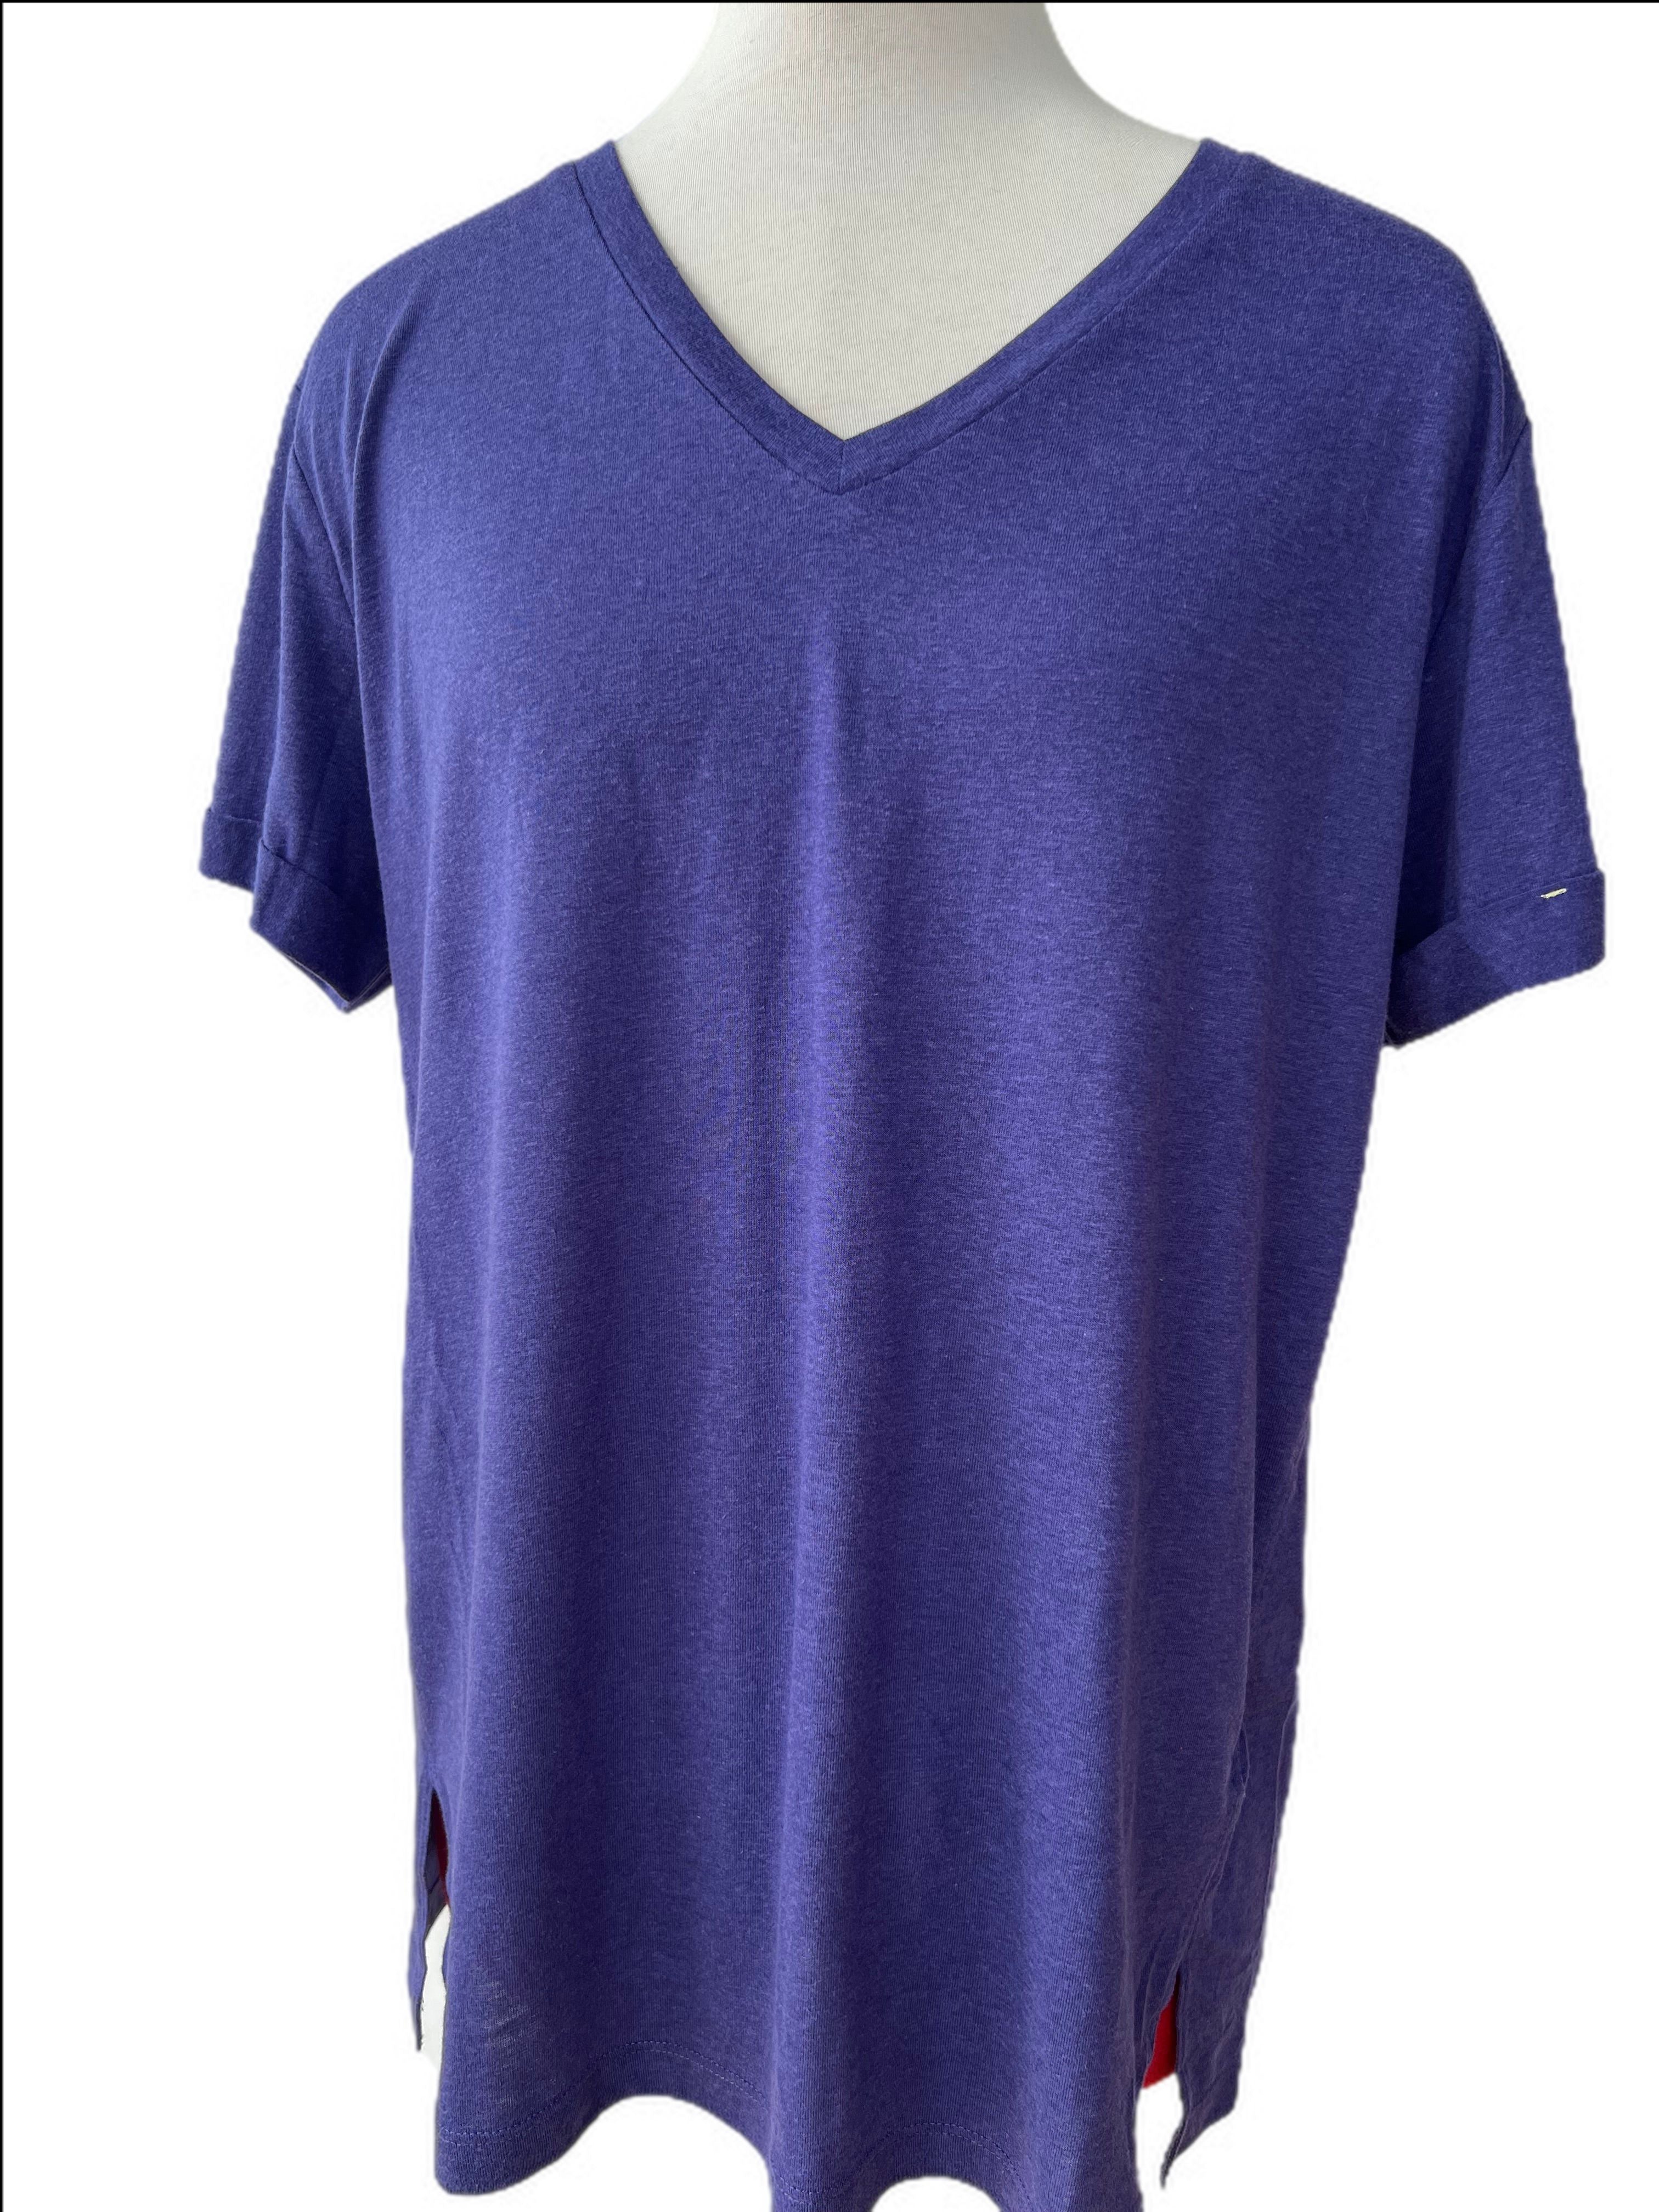 Short Sleeve V neck tee with vents